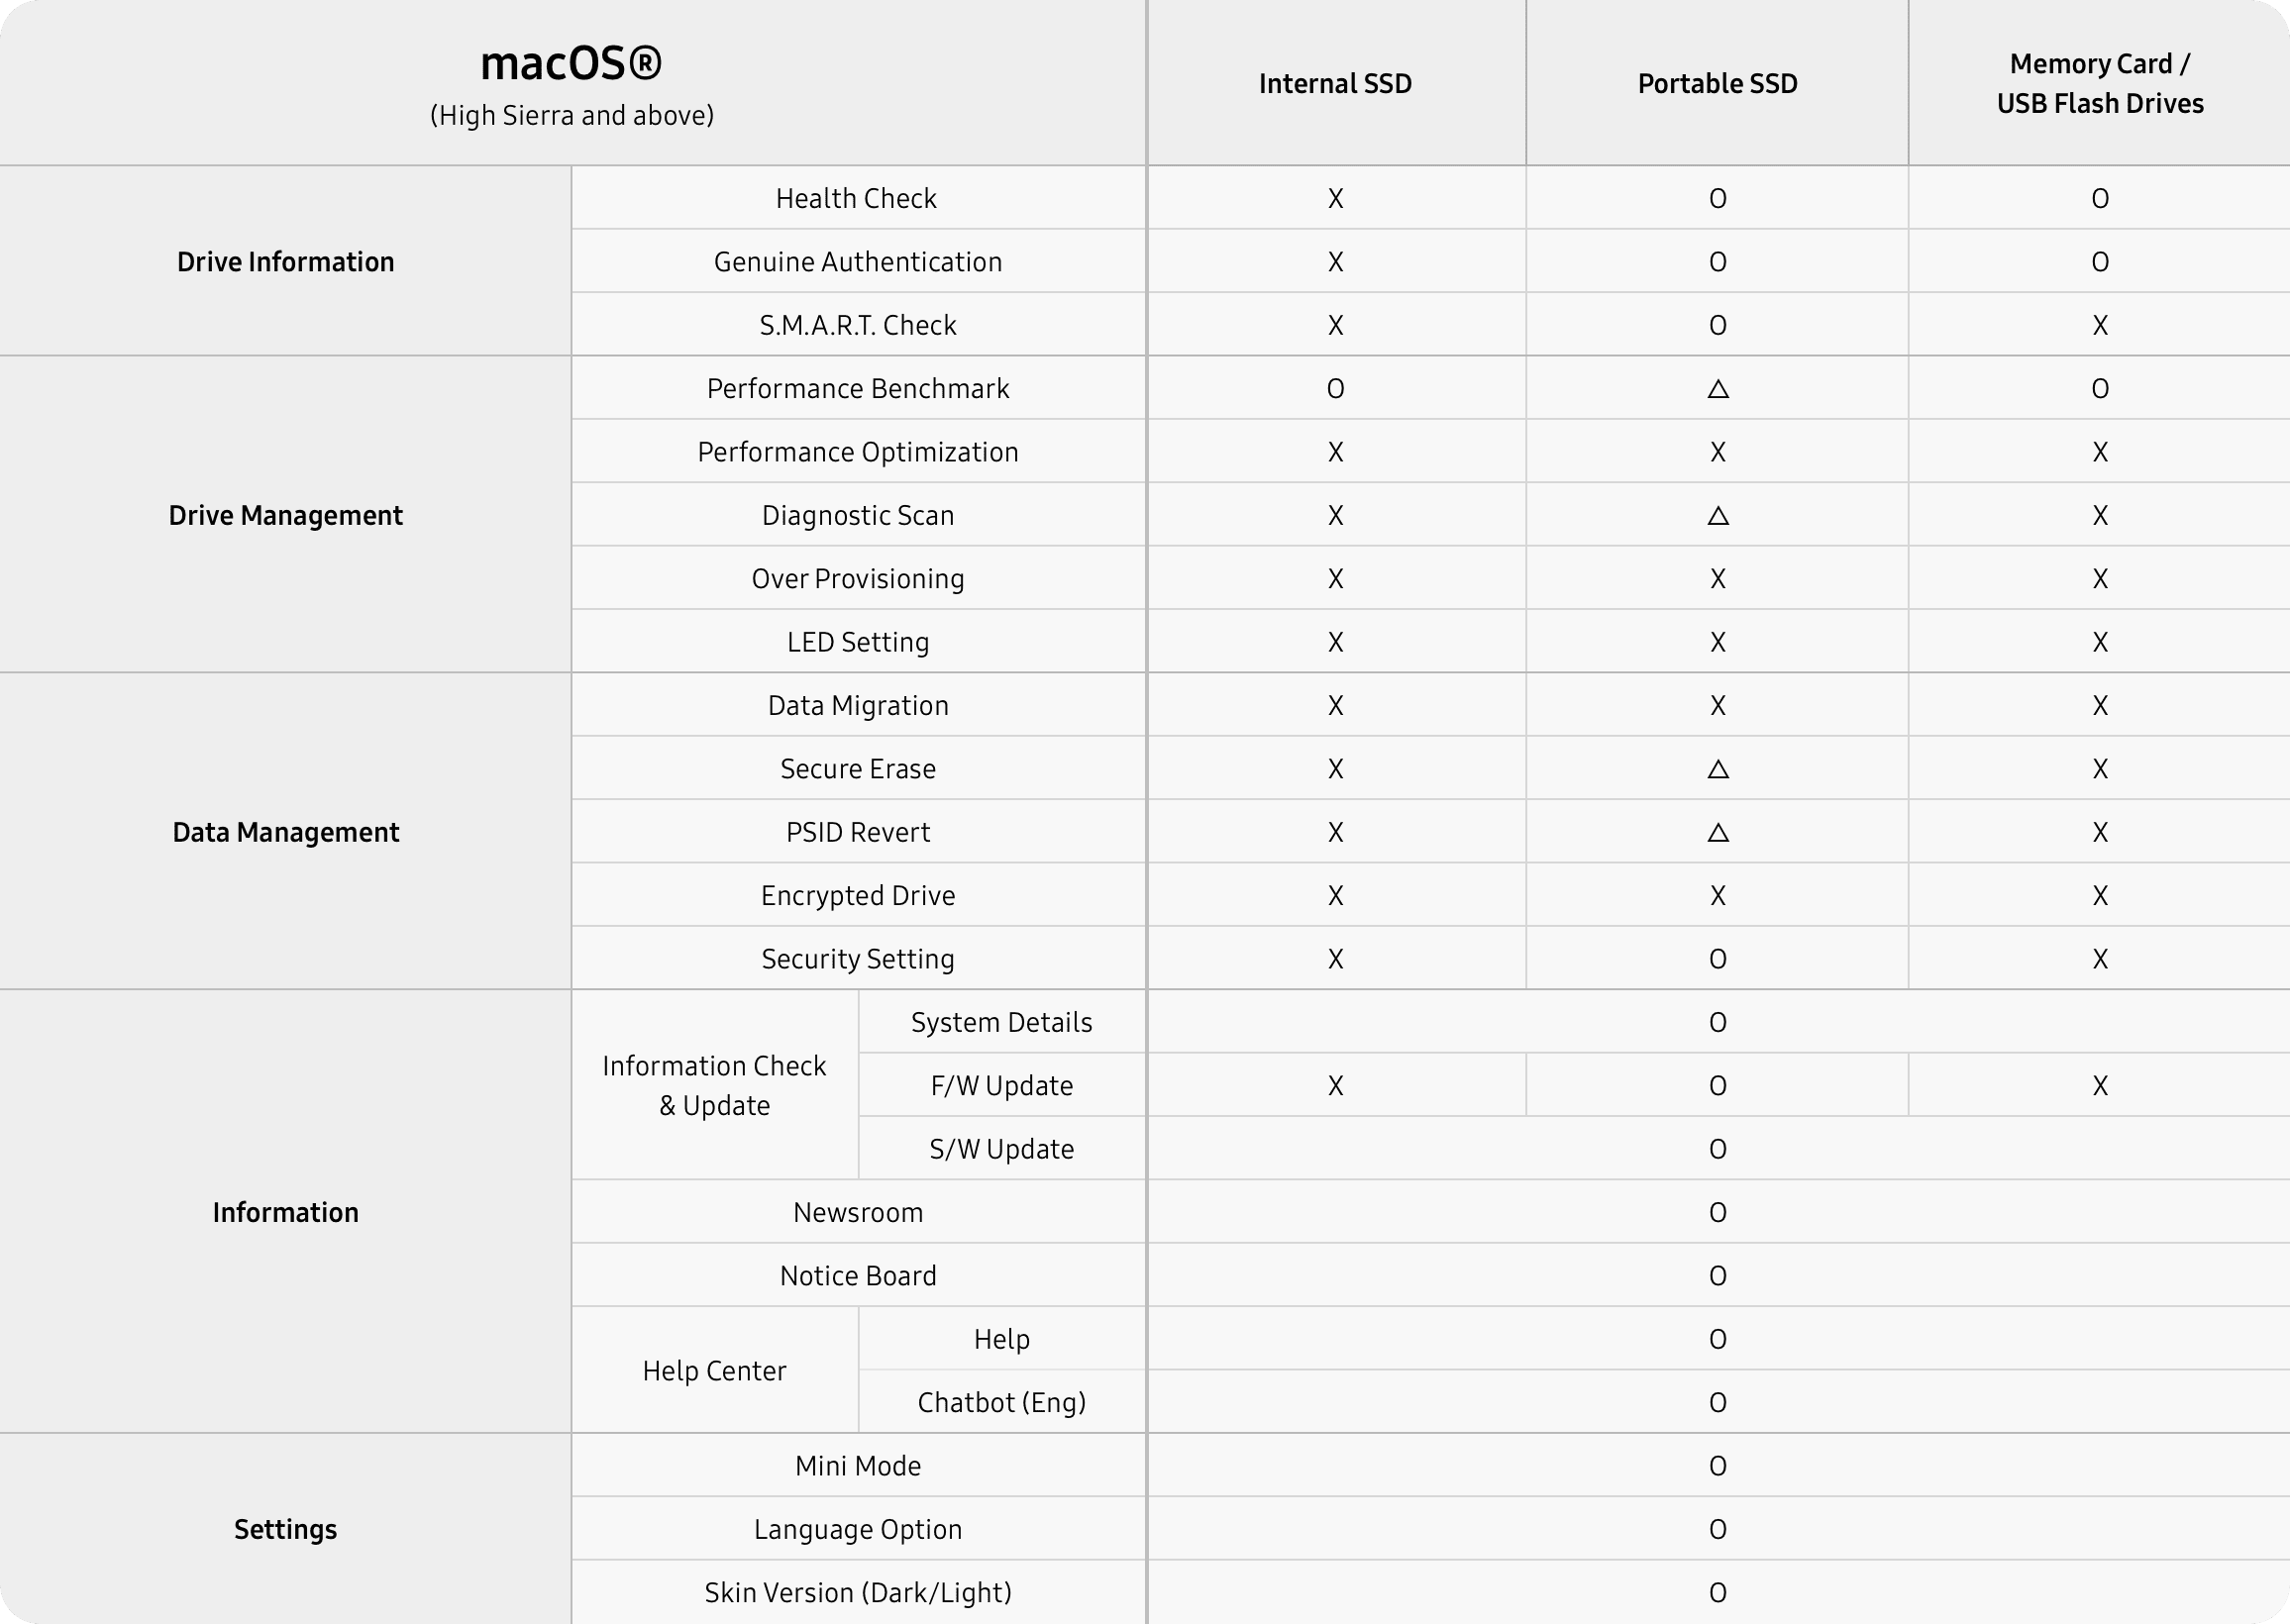 Comparison table of macOS operating system compatibility features for Samsung brand memory products (internal SSDs, portable SSDs, memory cards, USB flash drives) compatible with Samsung Magician.